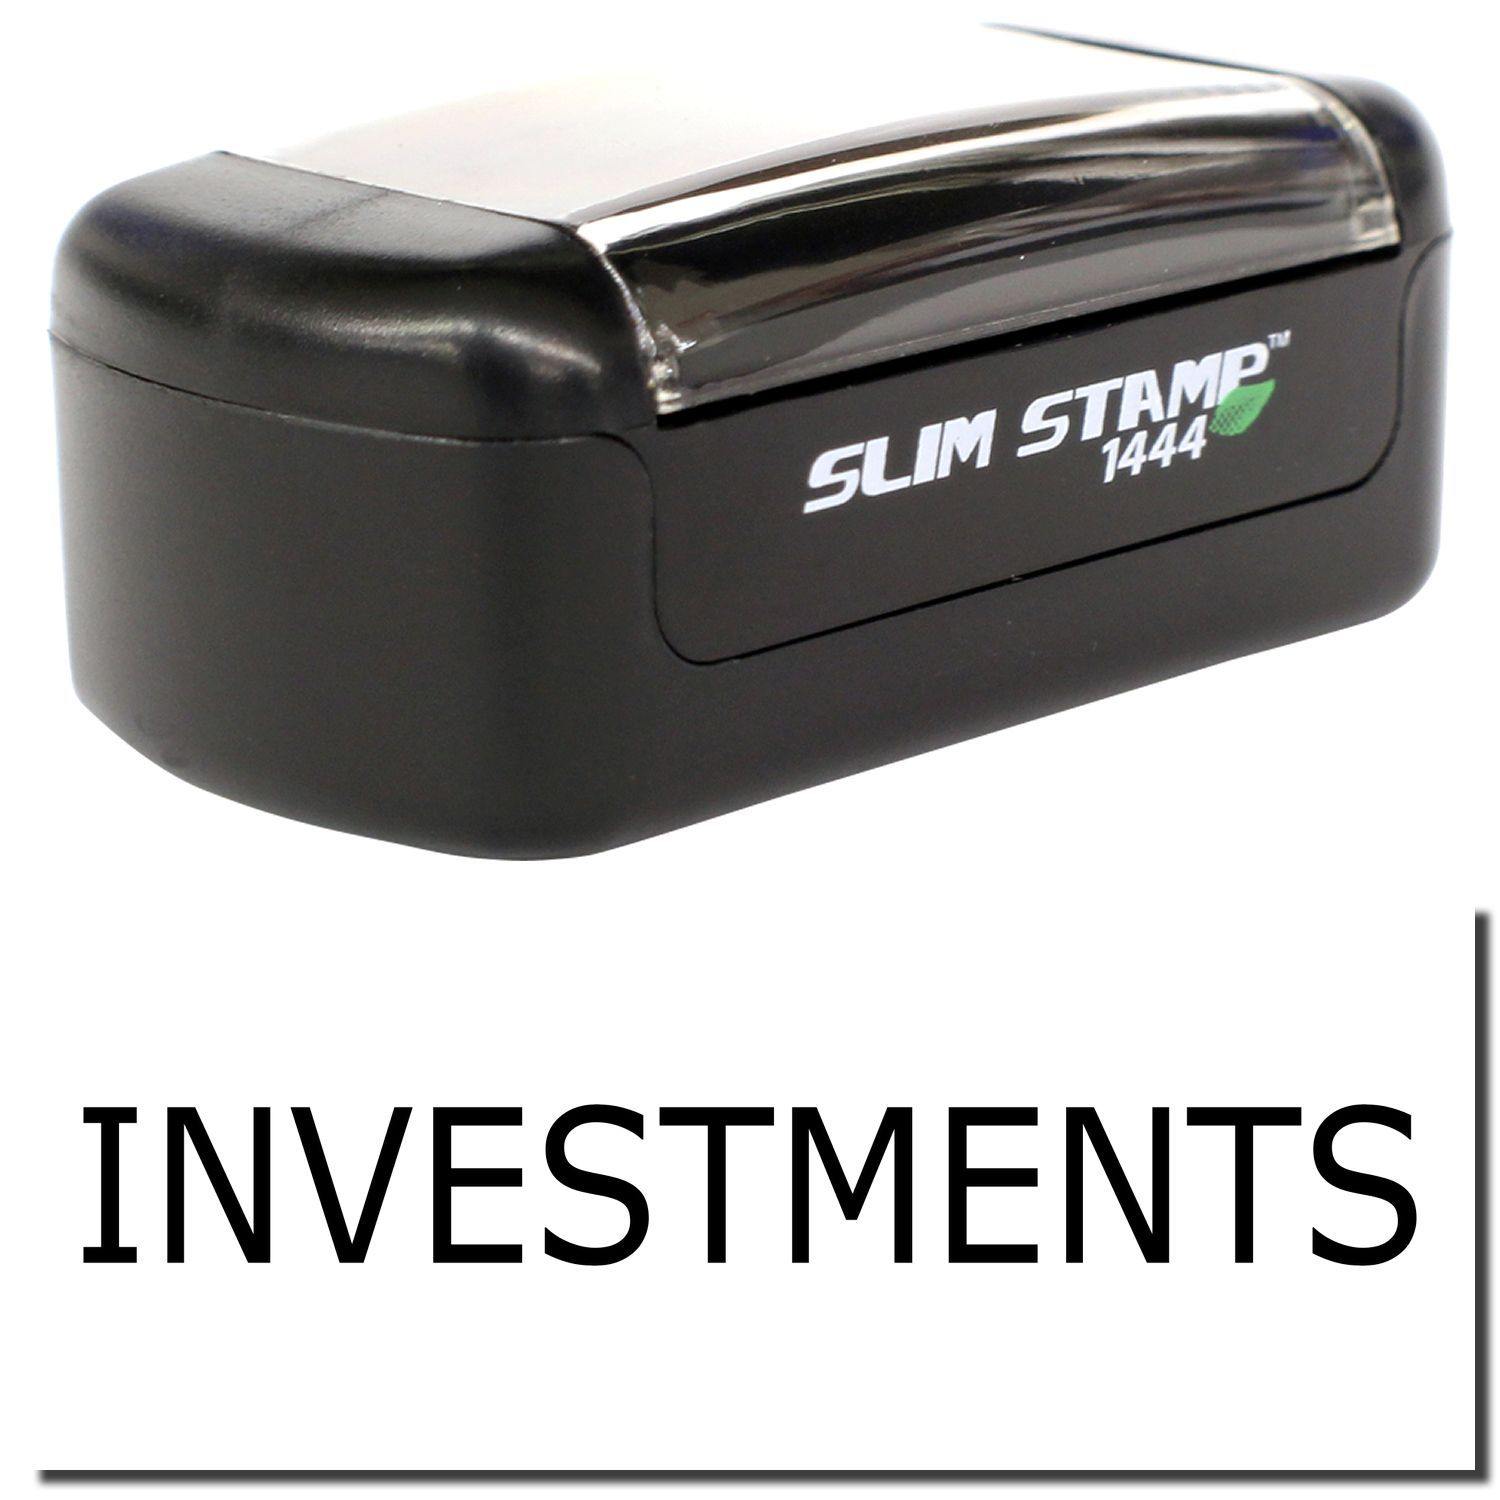 A stock office pre-inked stamp with a stamped image showing how the text "INVESTMENTS" is displayed after stamping.